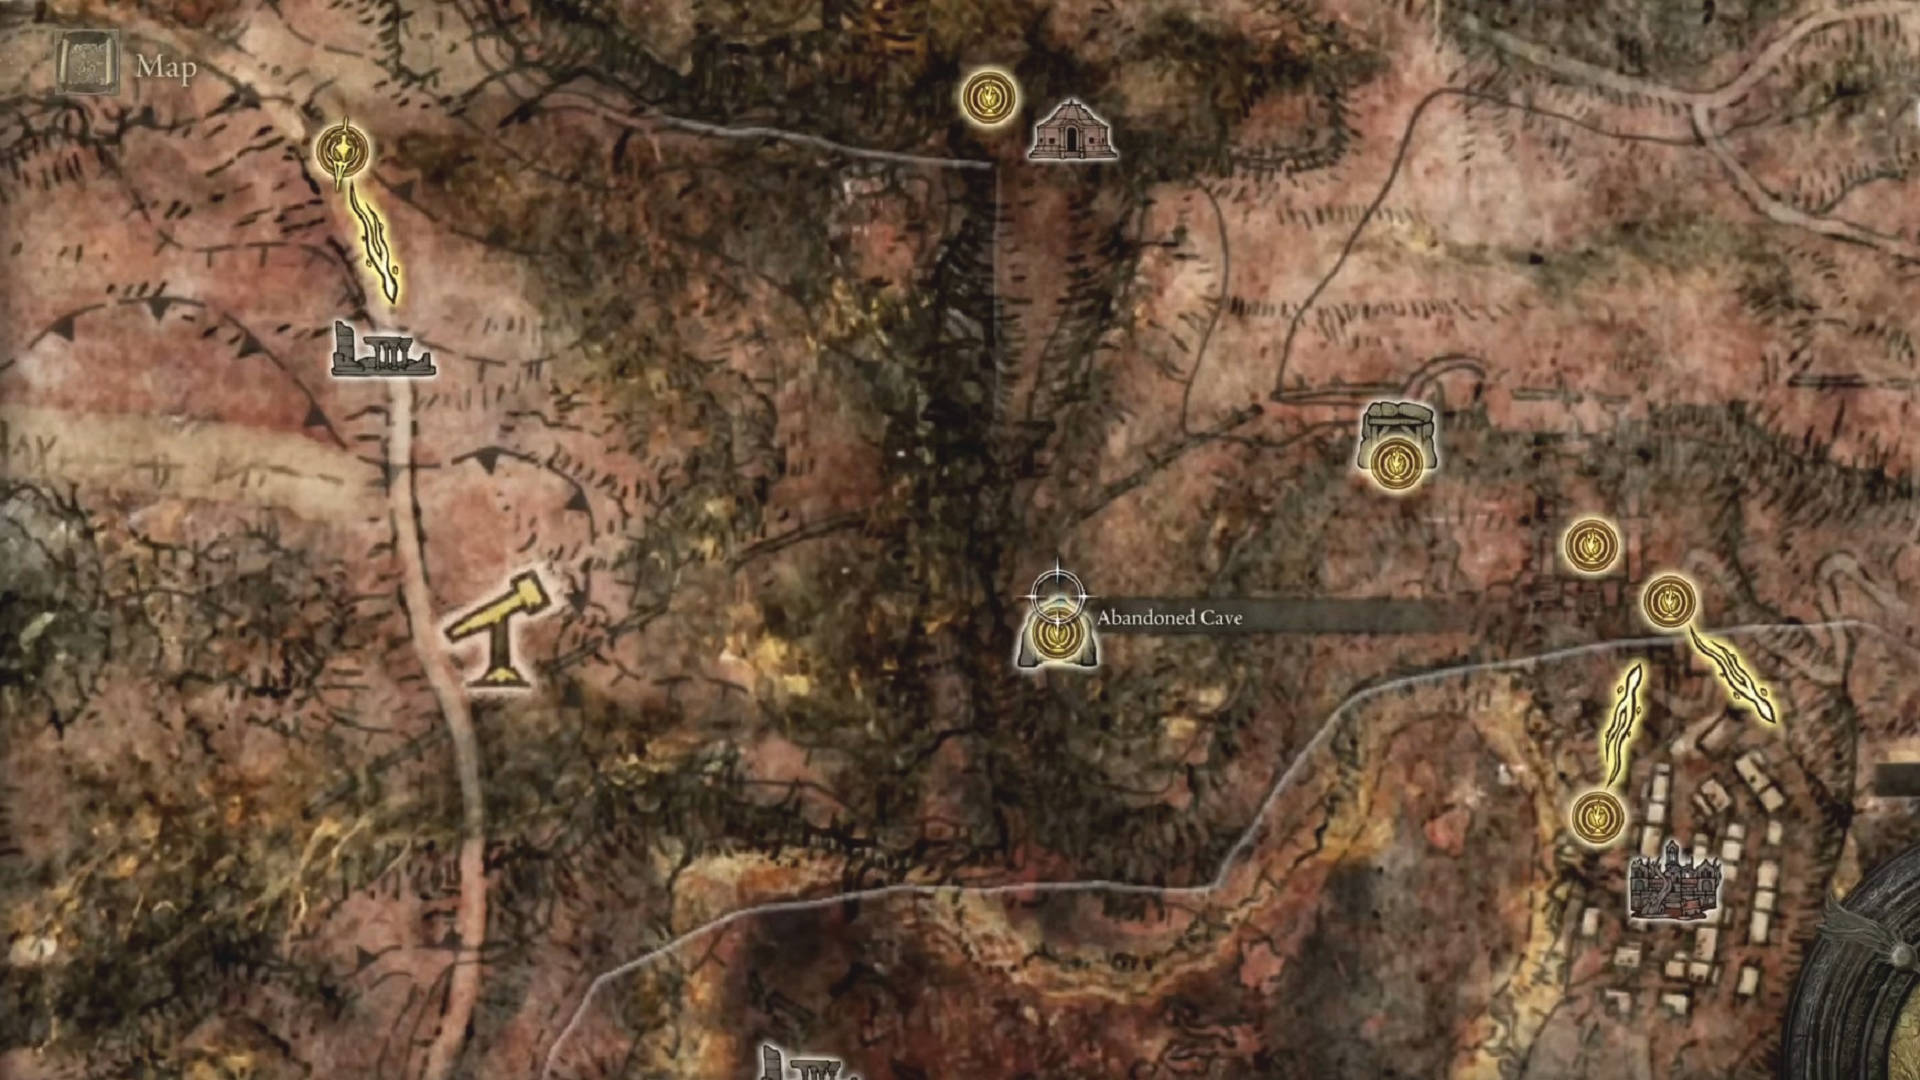 Best Elden Ring Talismans and their locations